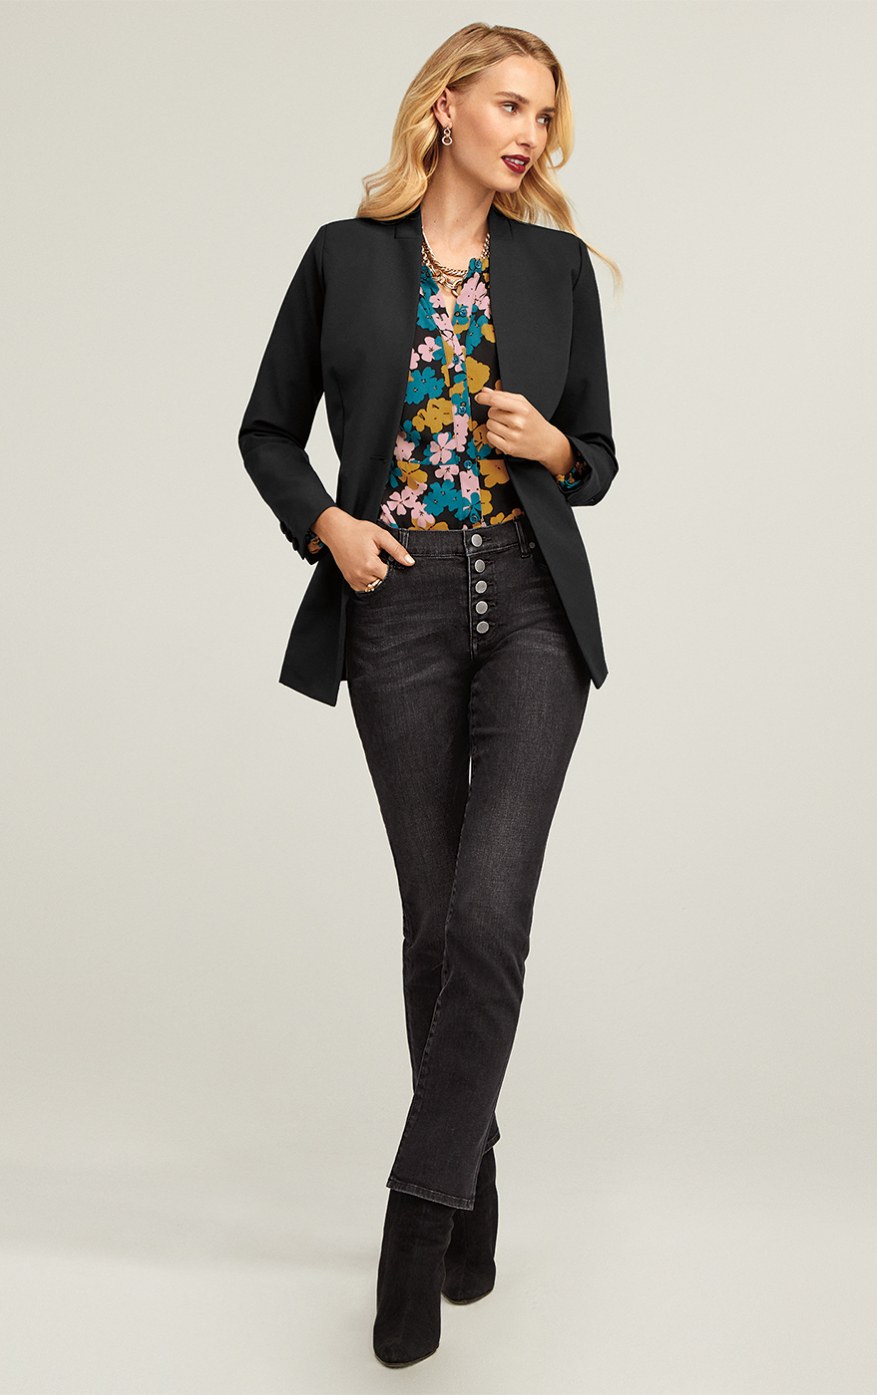 Dinner Jacket in Black, Button Fly Straight in Carbon, Favorite Blouse in Flower Drop